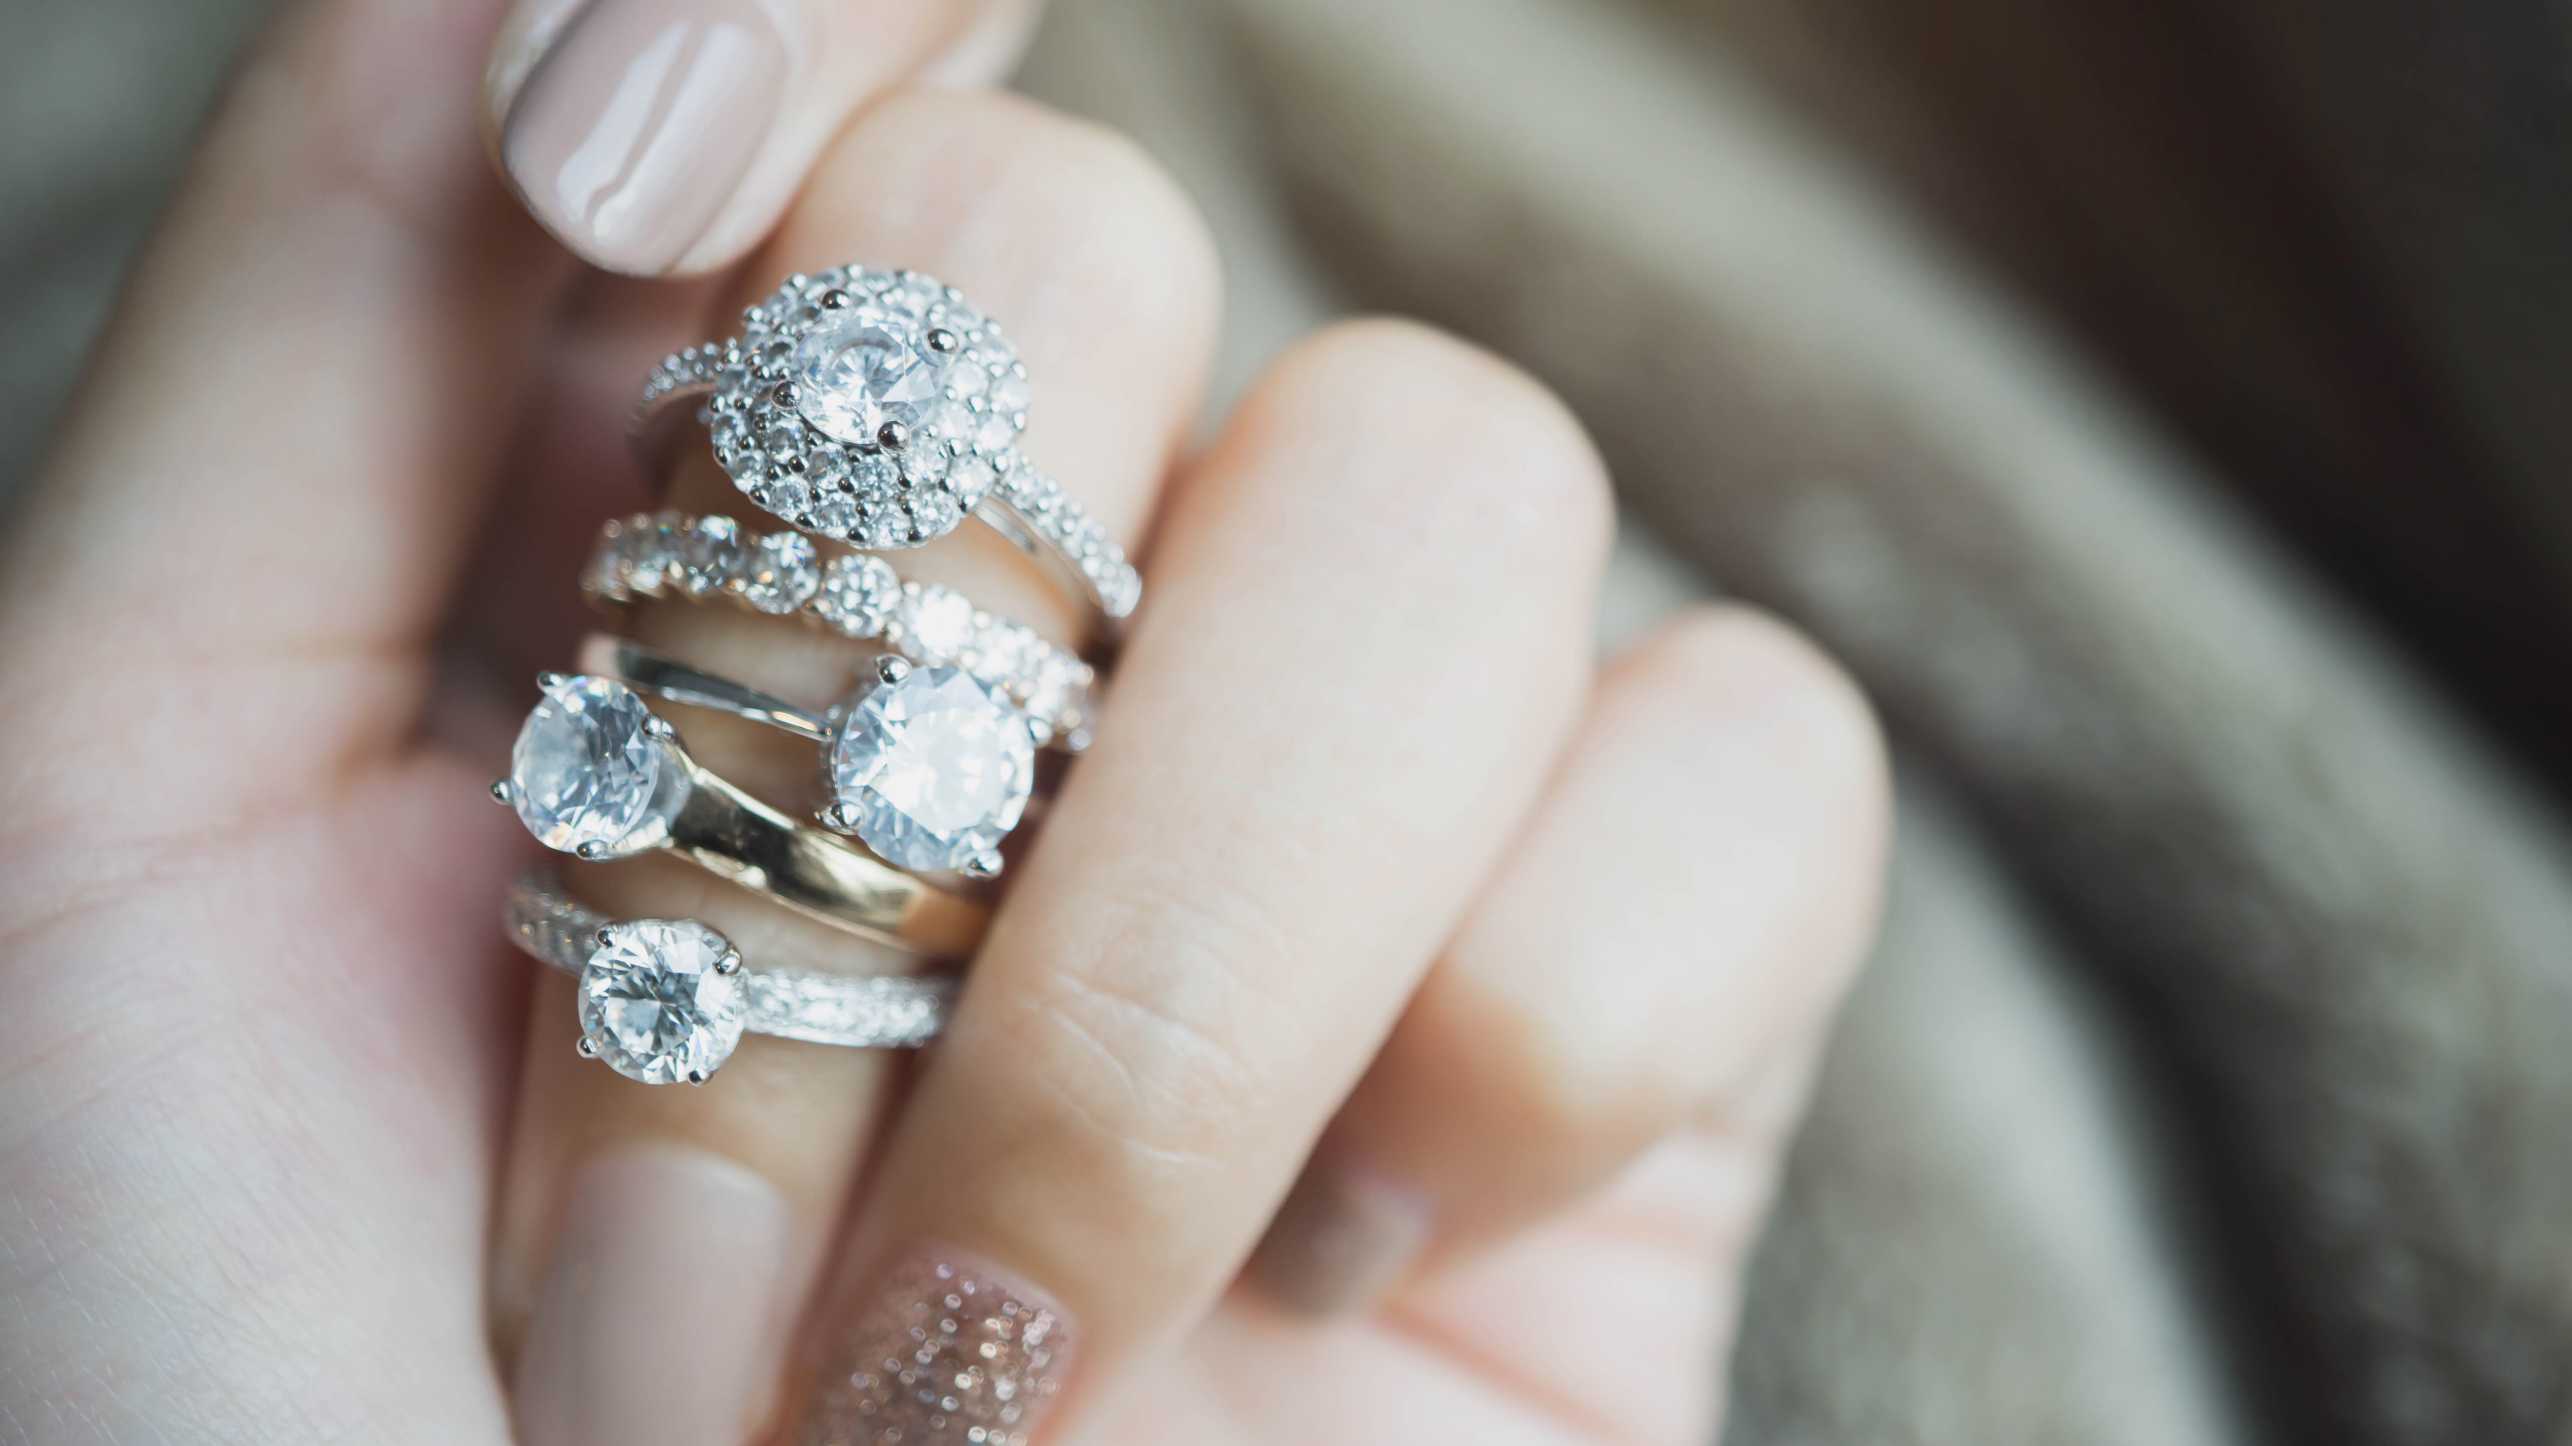 Enlarged view: A woman's hand with many diamond rings